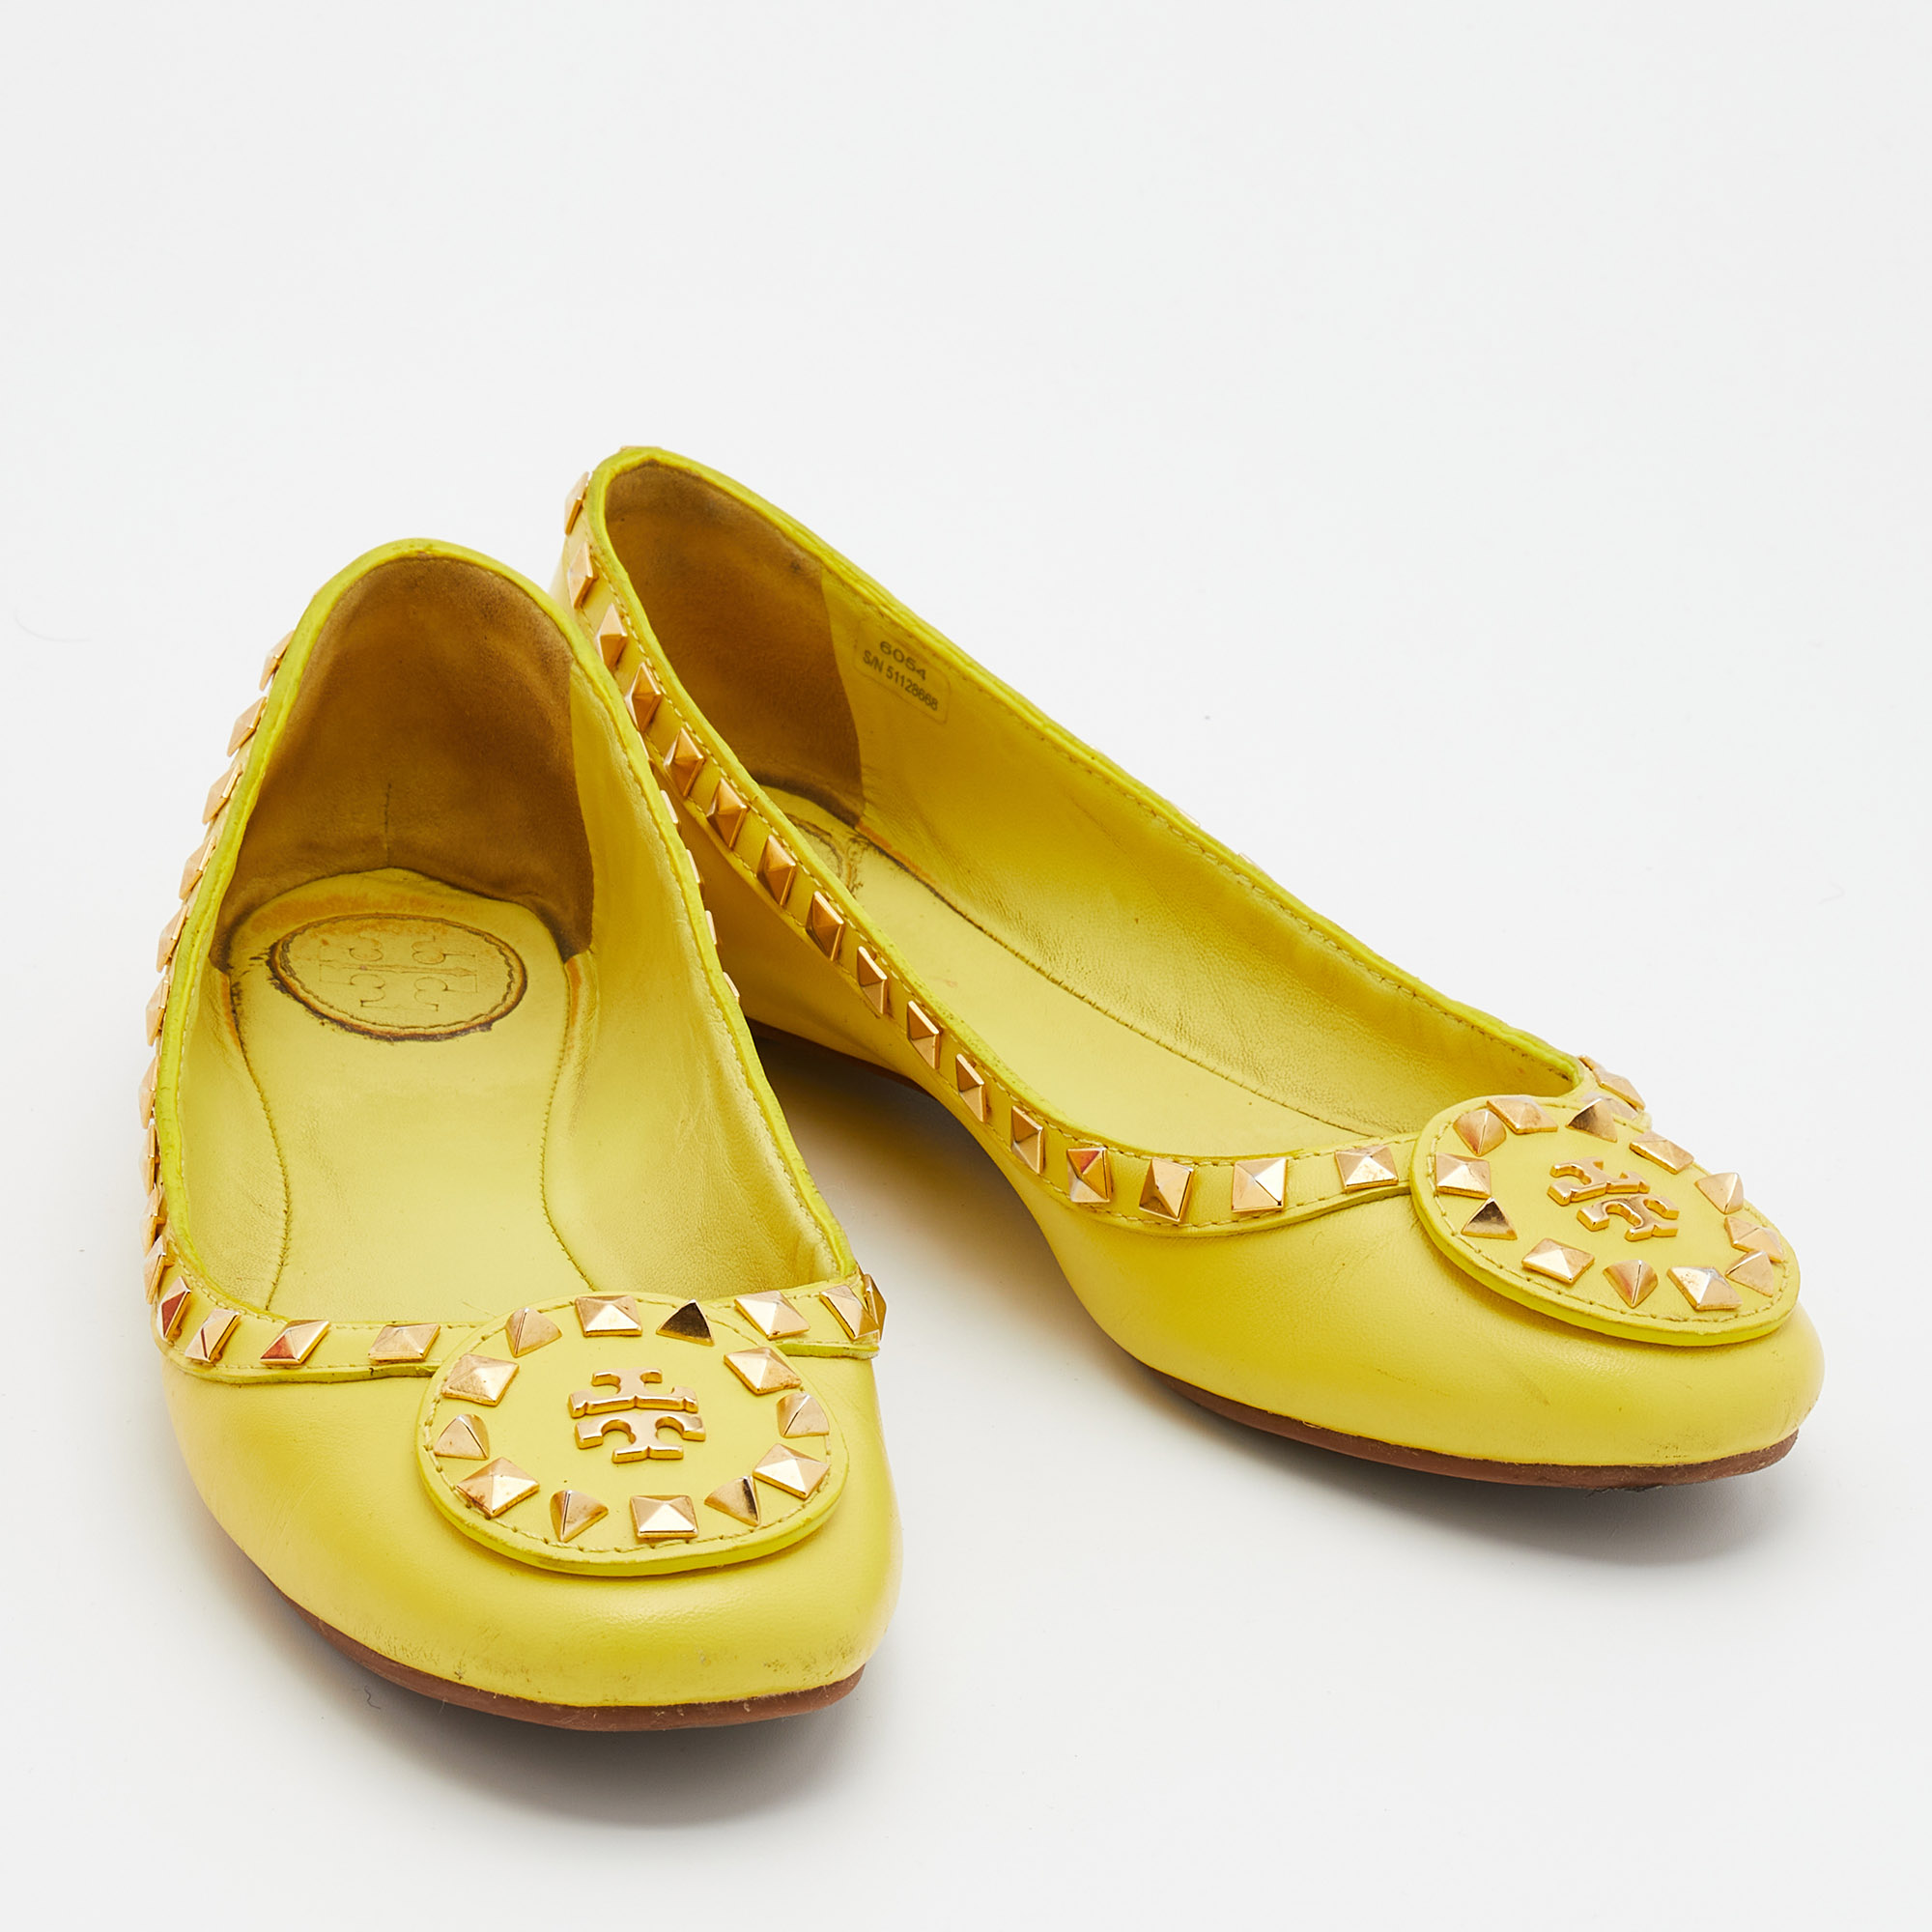 Tory Burch Yellow Leather Studded Ballet Flats Size 37.5